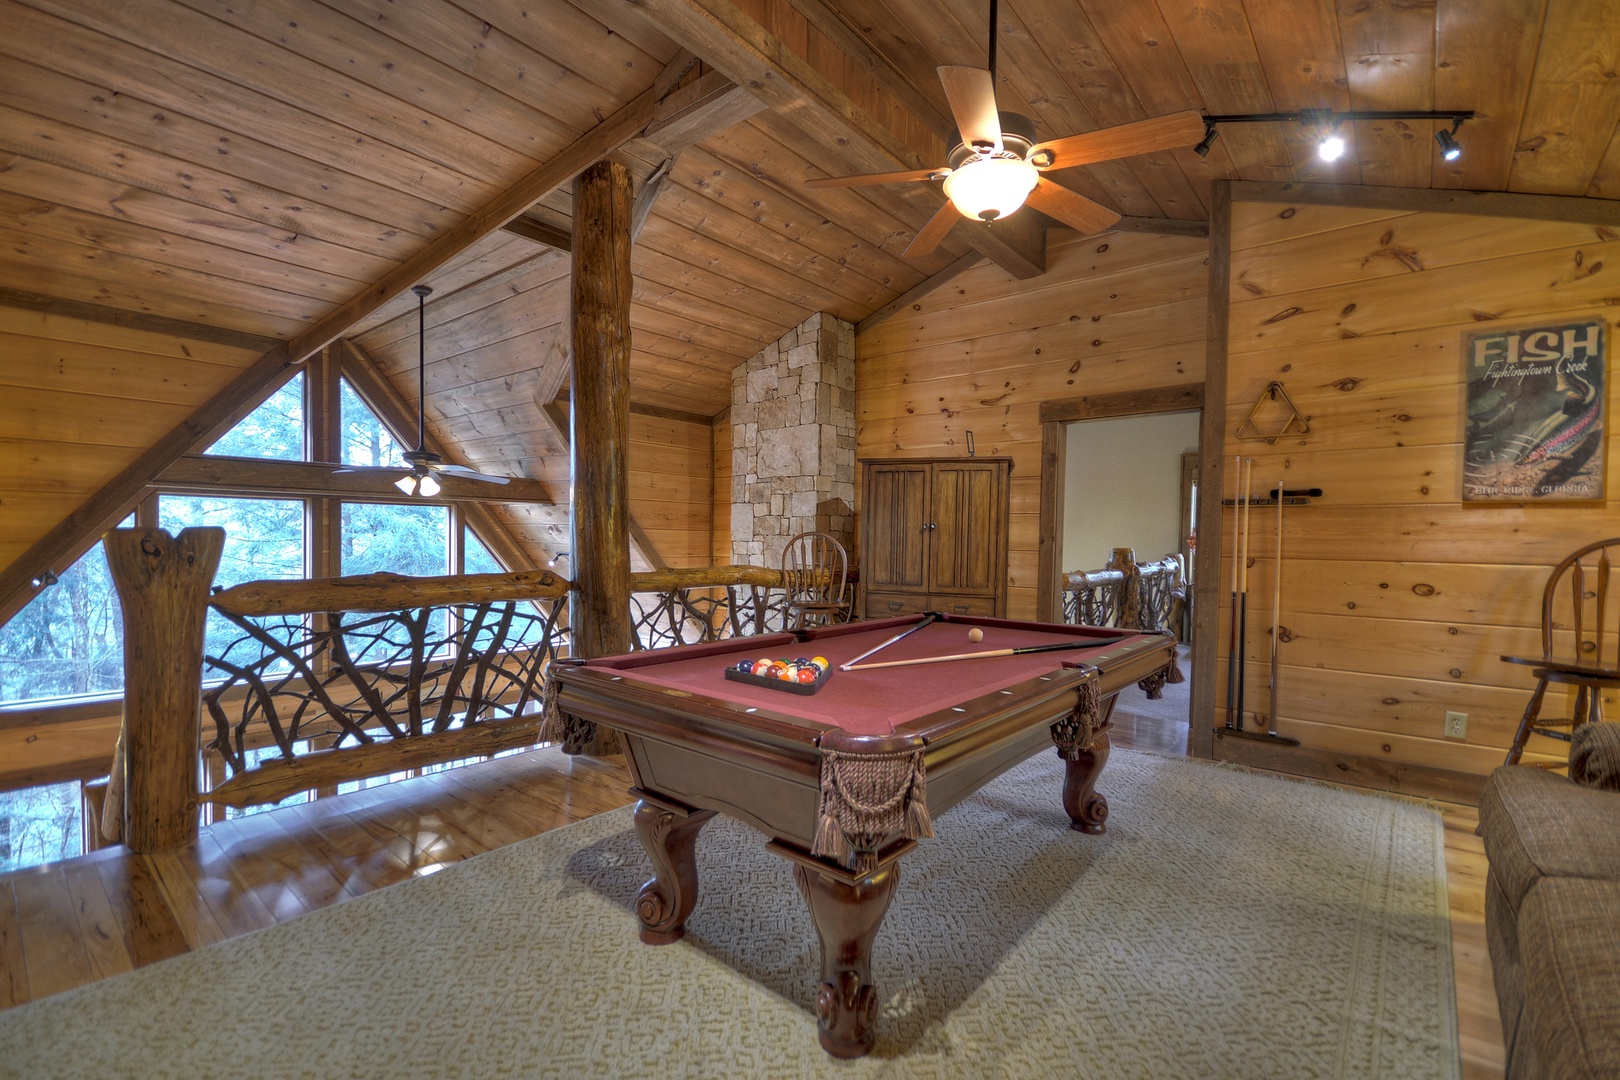 Reel Creek Lodge- Upper level pool table in the loft with forest views